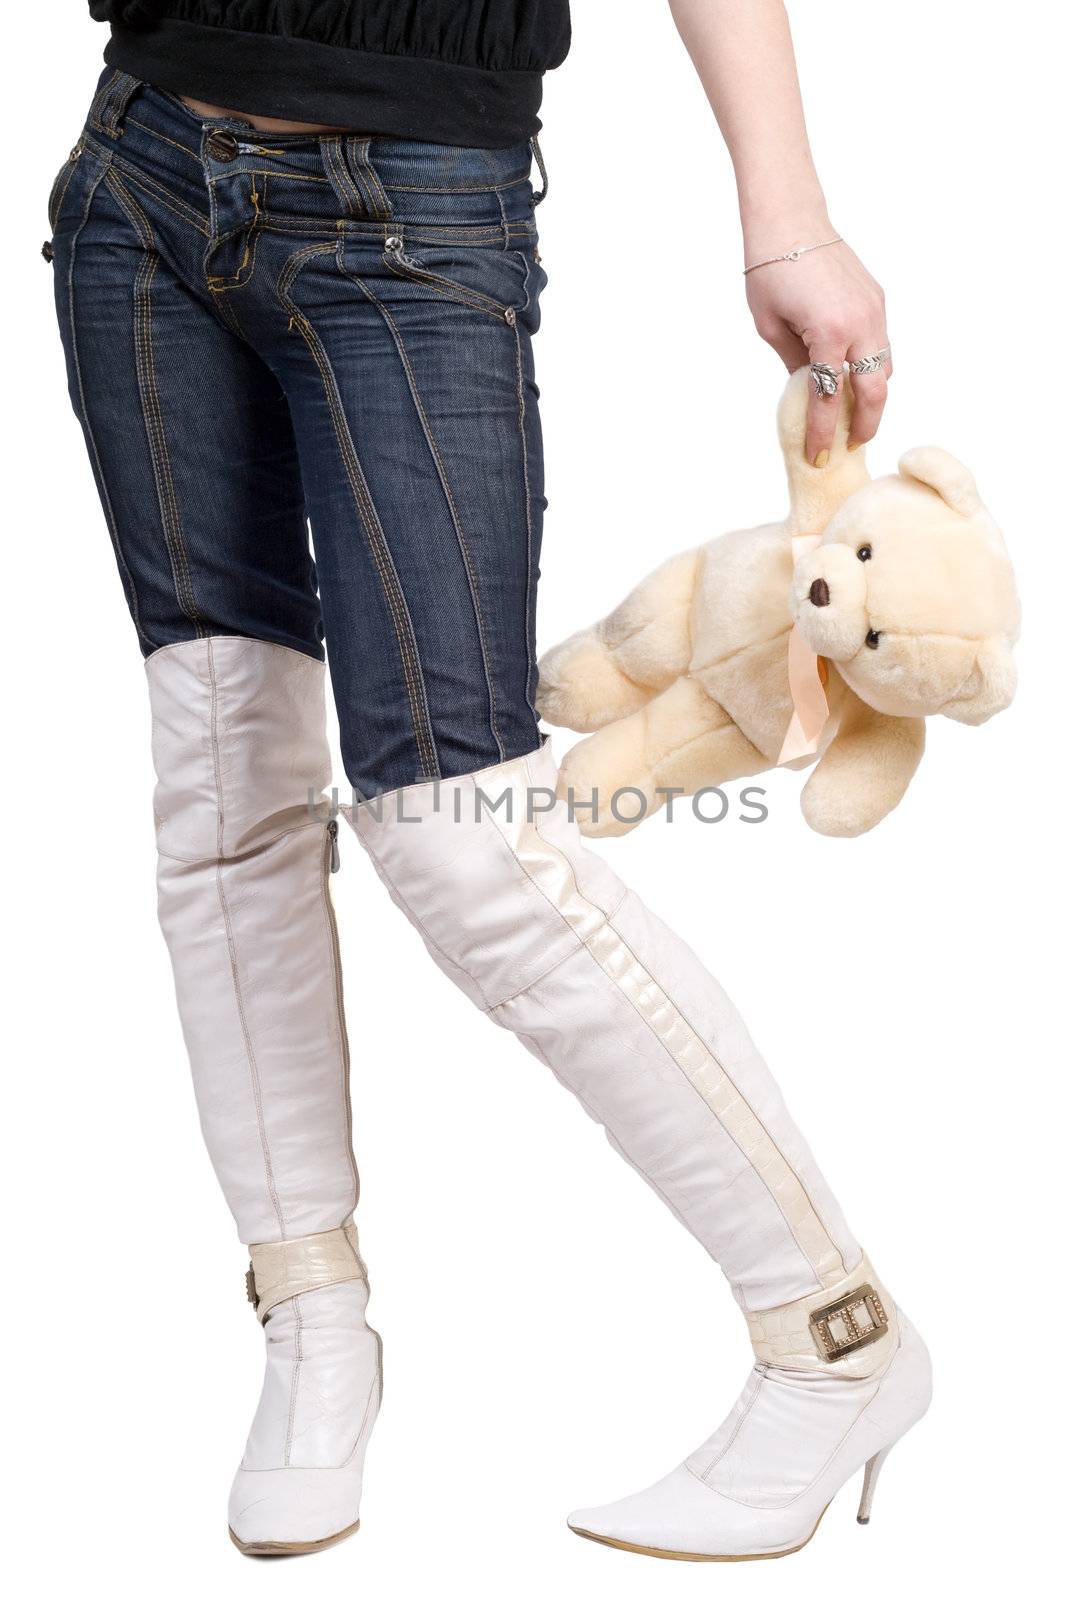 Woman taking a teddy bear in her hand. Isolated on white